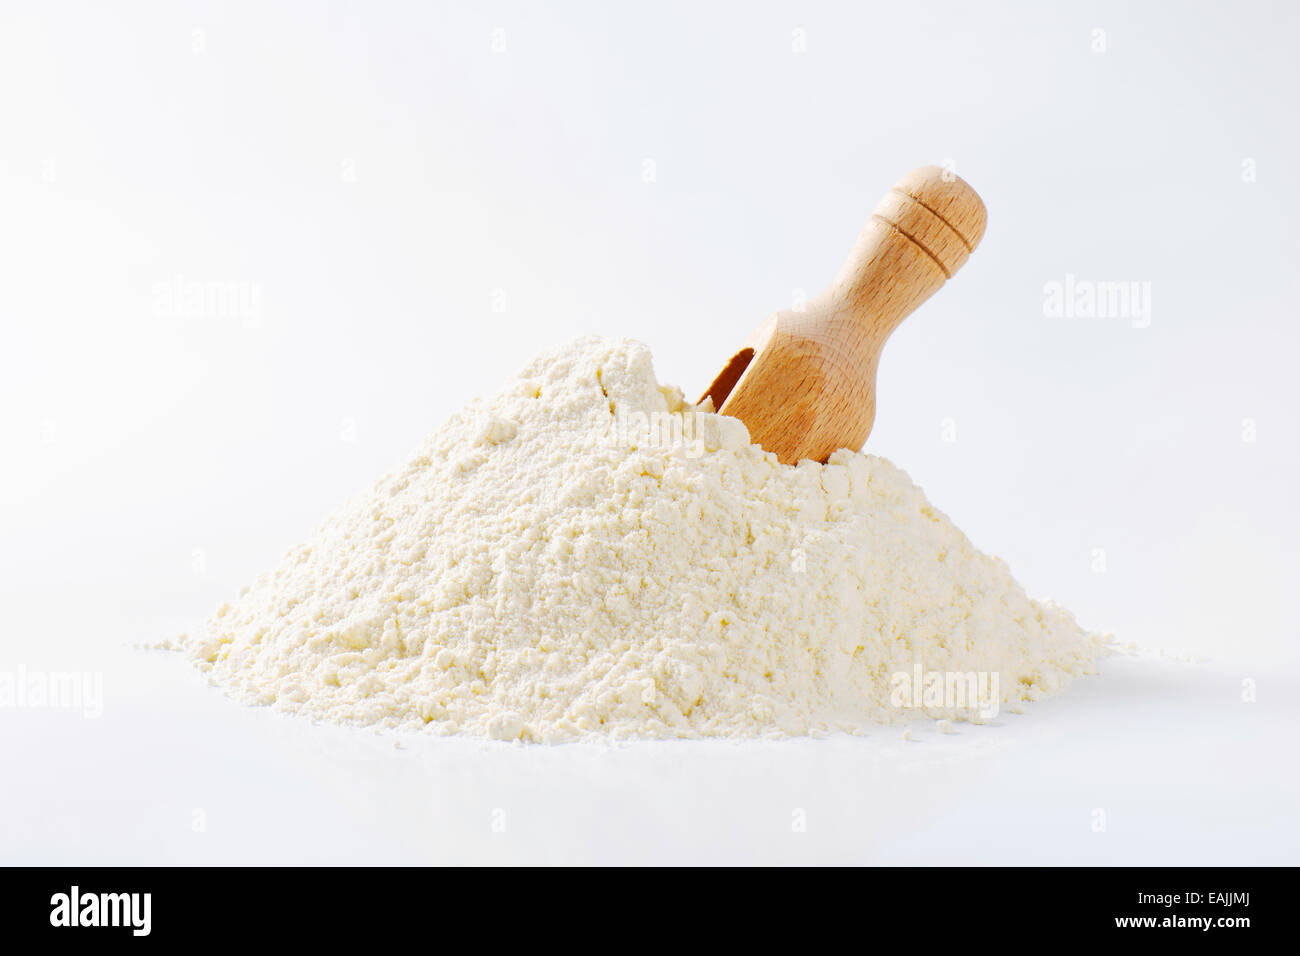 Pile of finely ground flour and wooden scoop Stock Photo